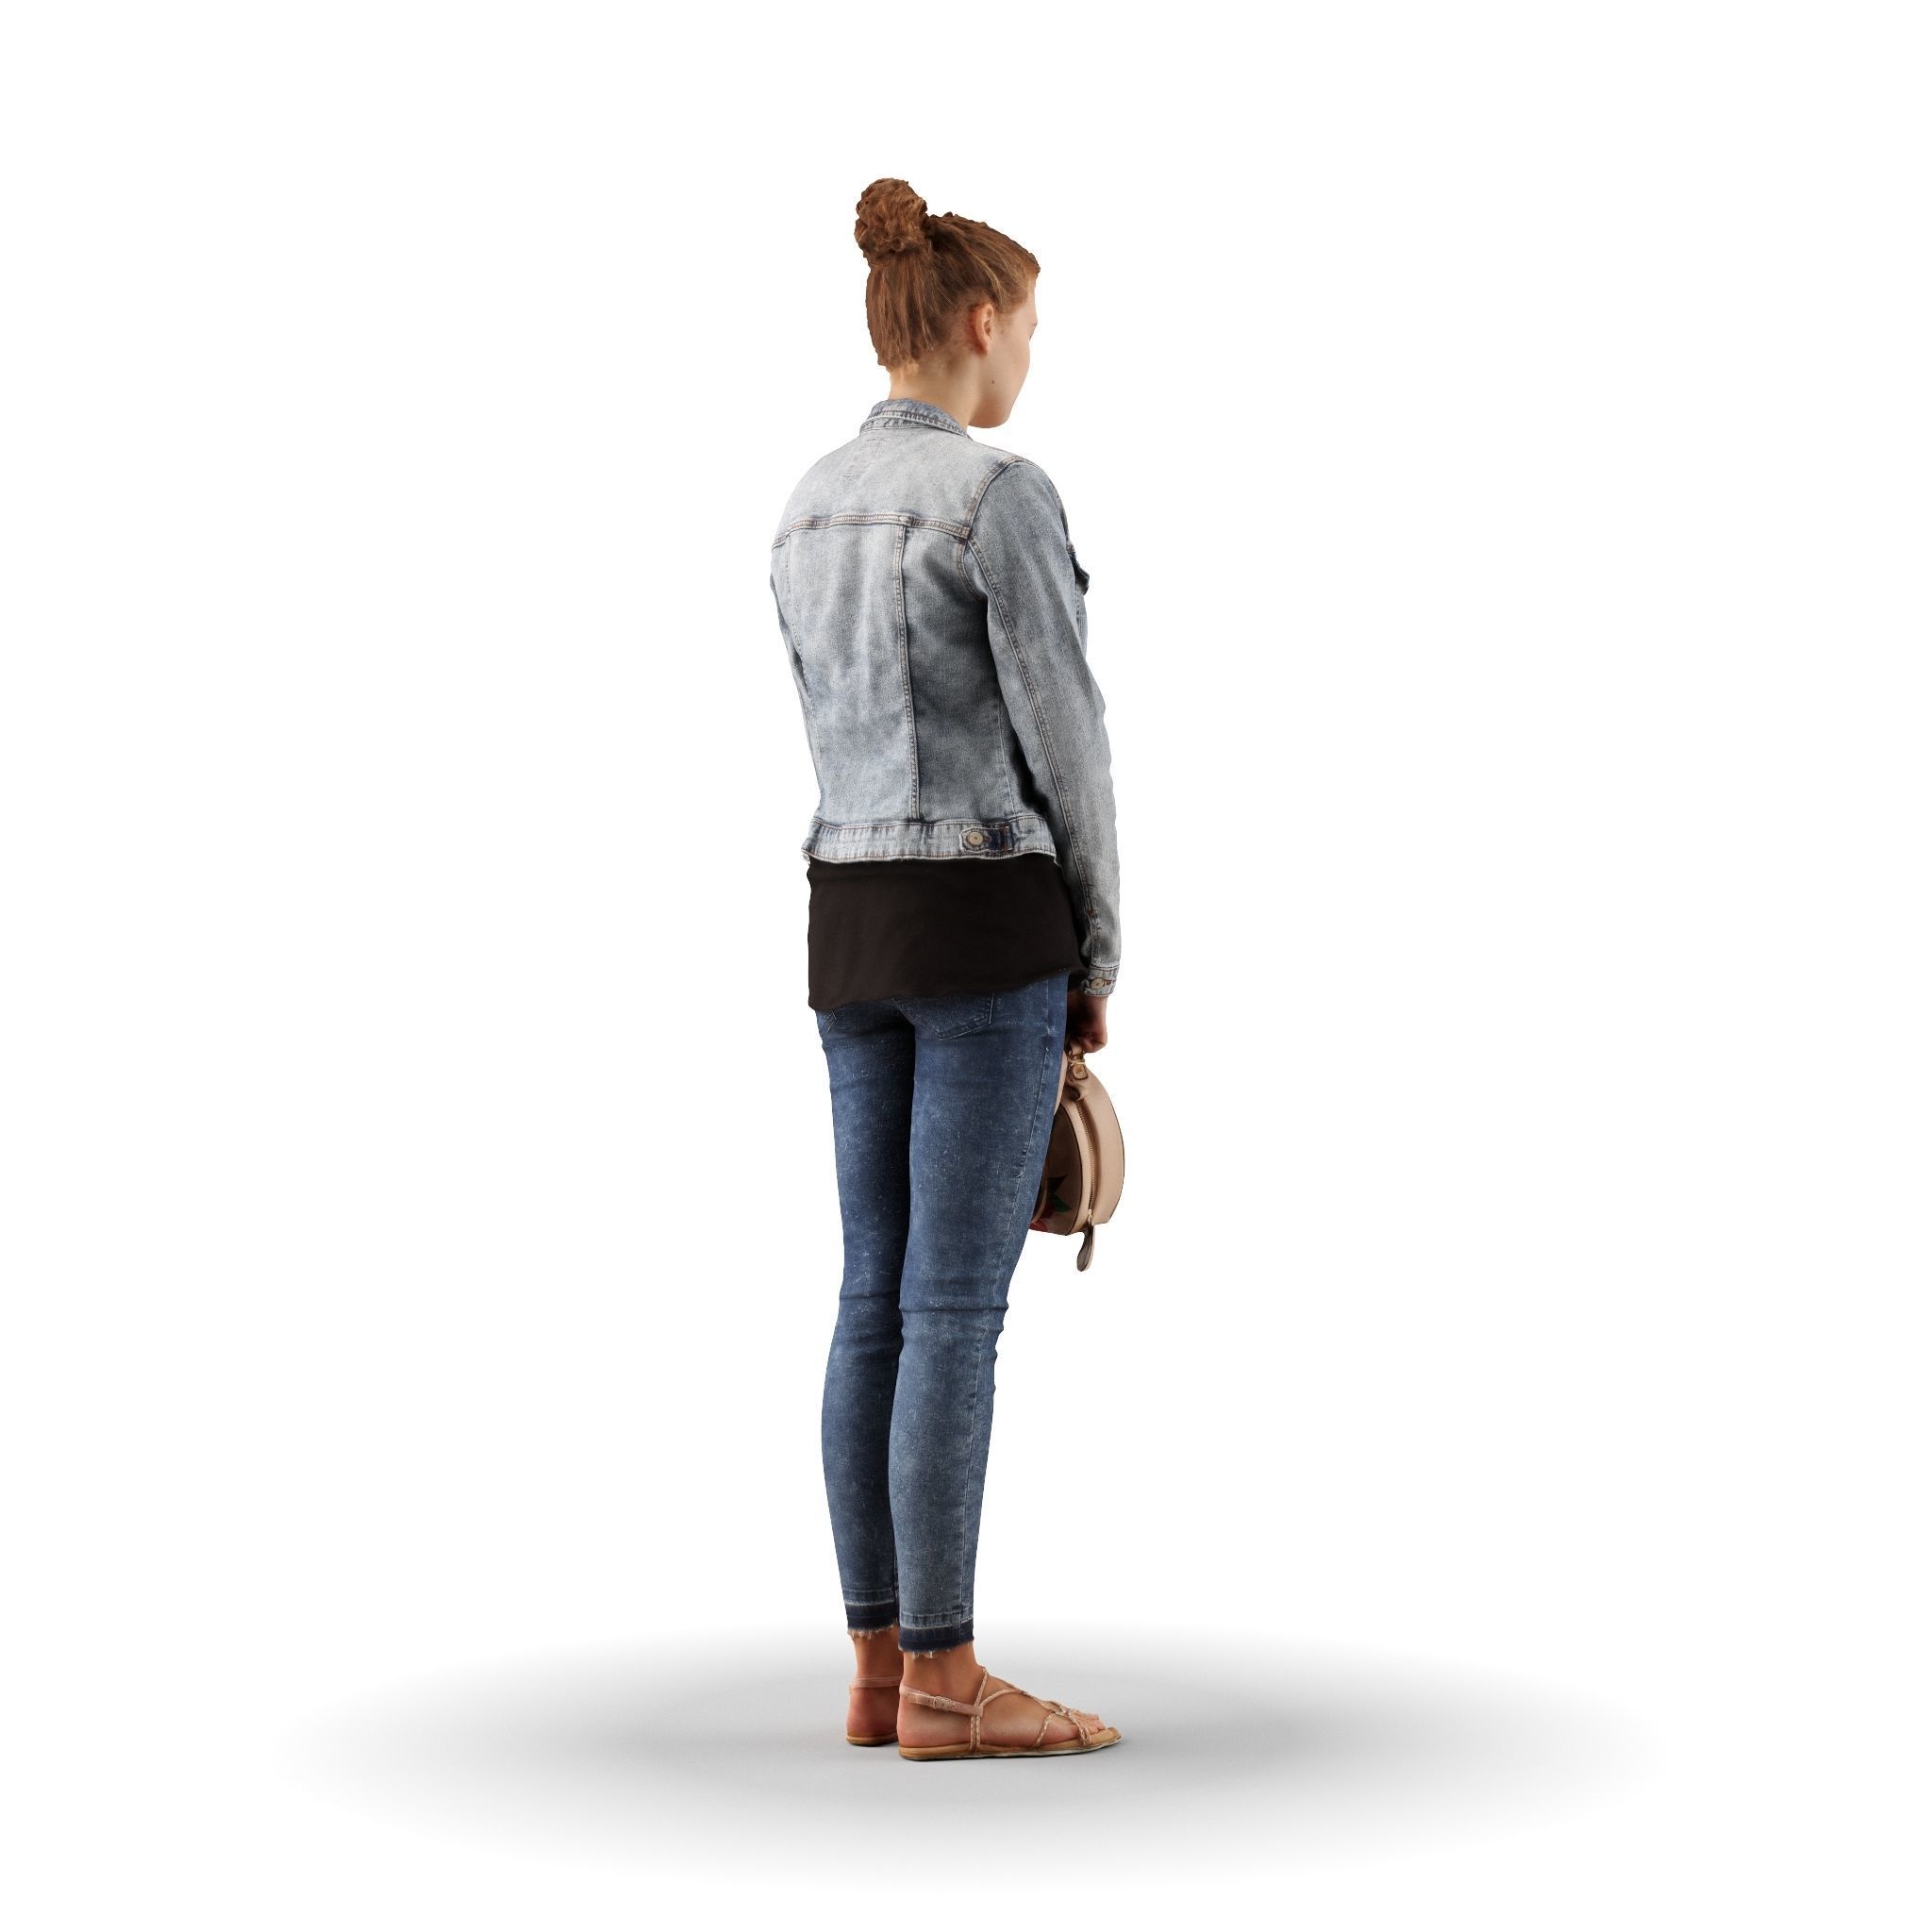 3D Ieva 07 Woman posed standing in casual jeans holding